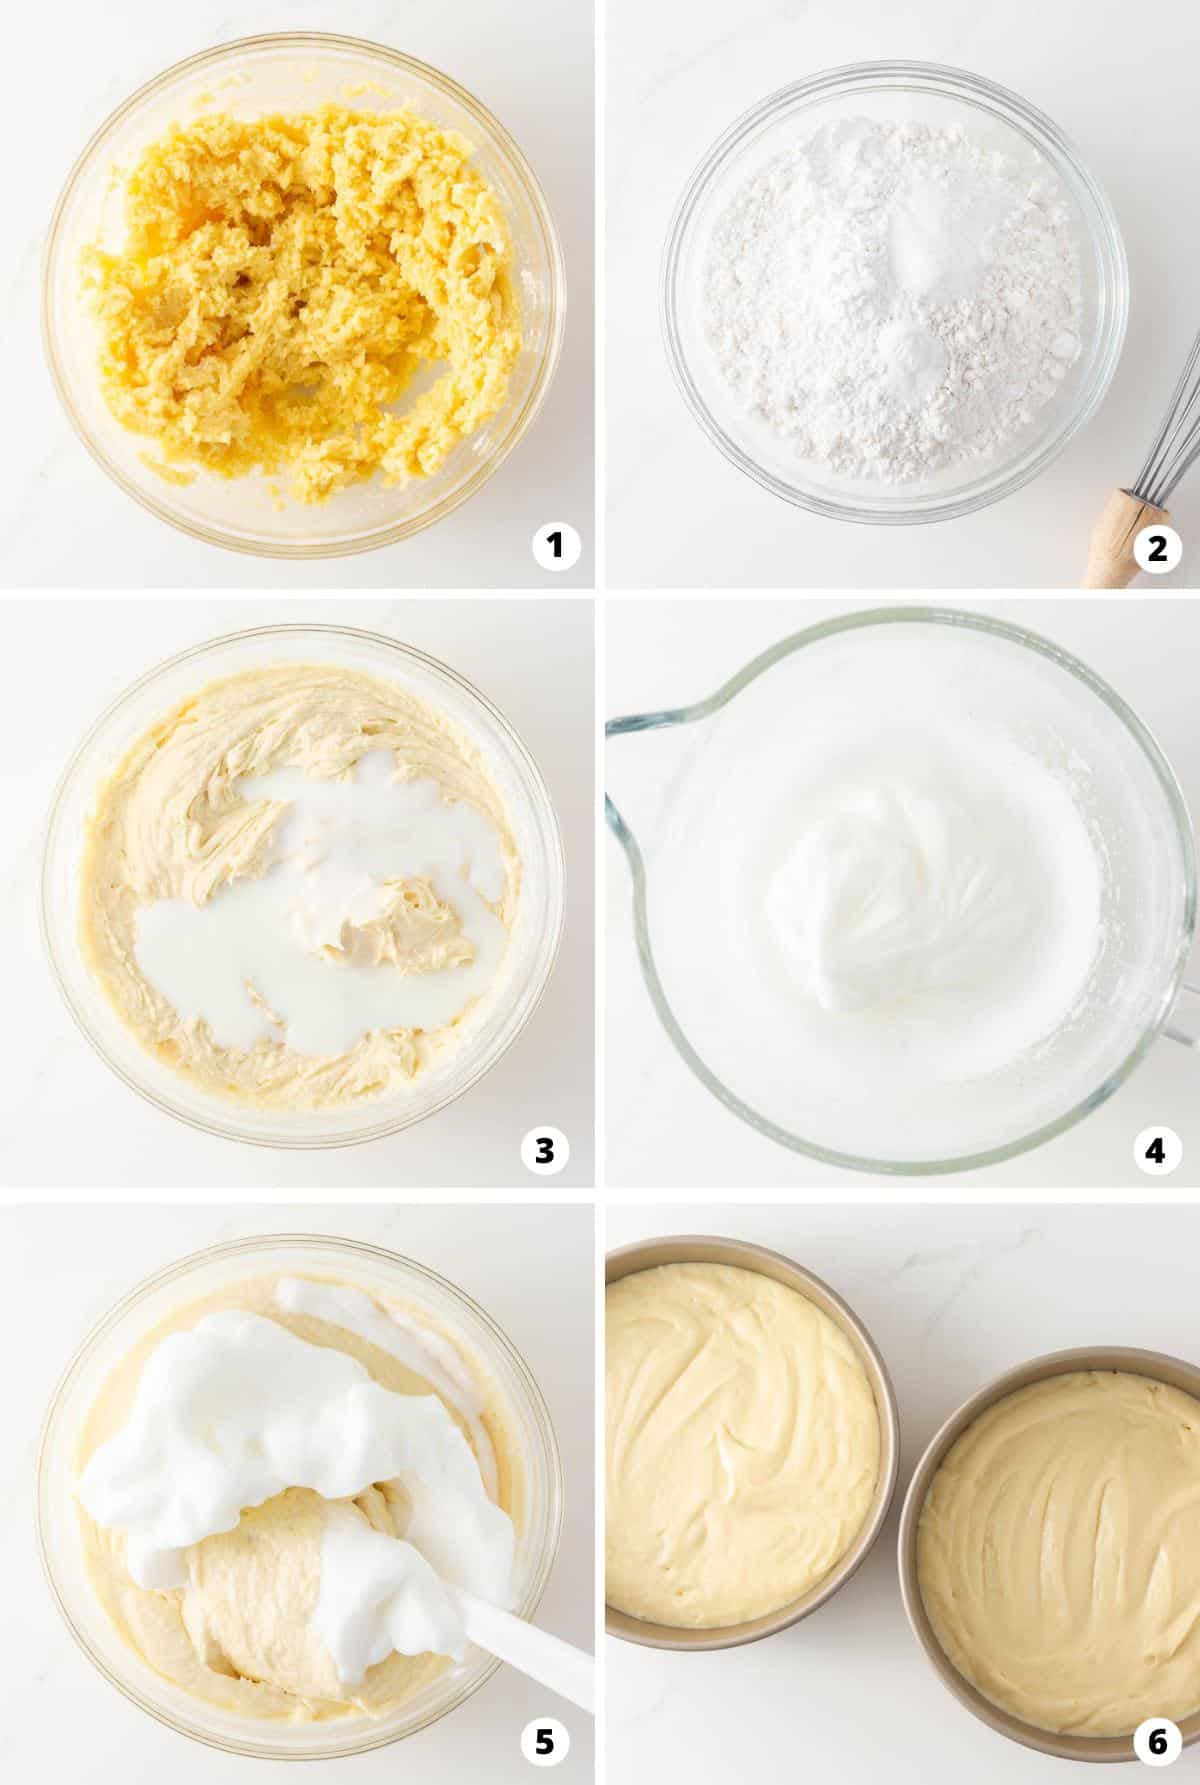 Showing how to make yellow cake in a 6 step collage.